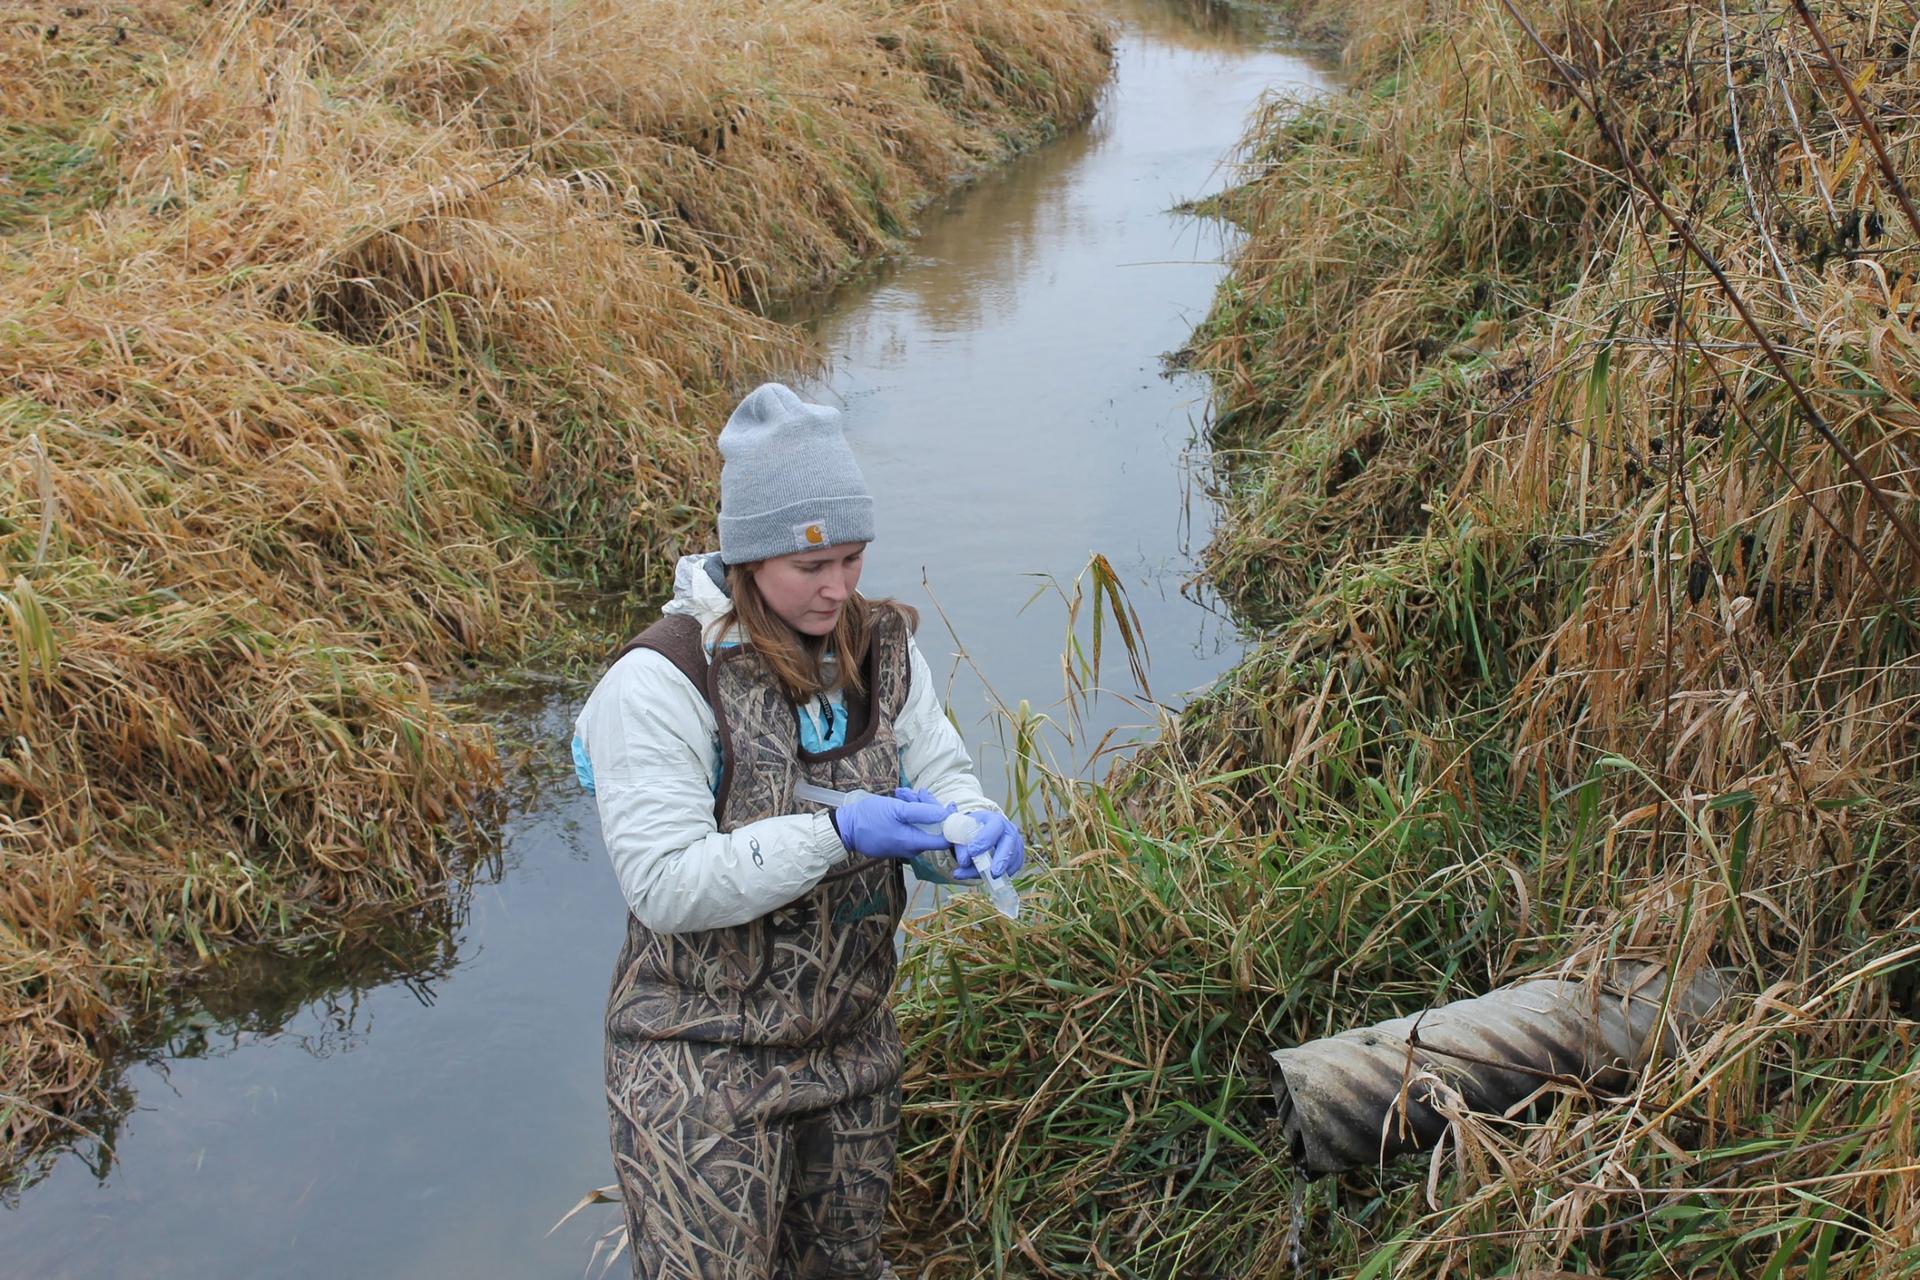 A woman is shown standing in a watery ditch and wearing camoflauge overalls.